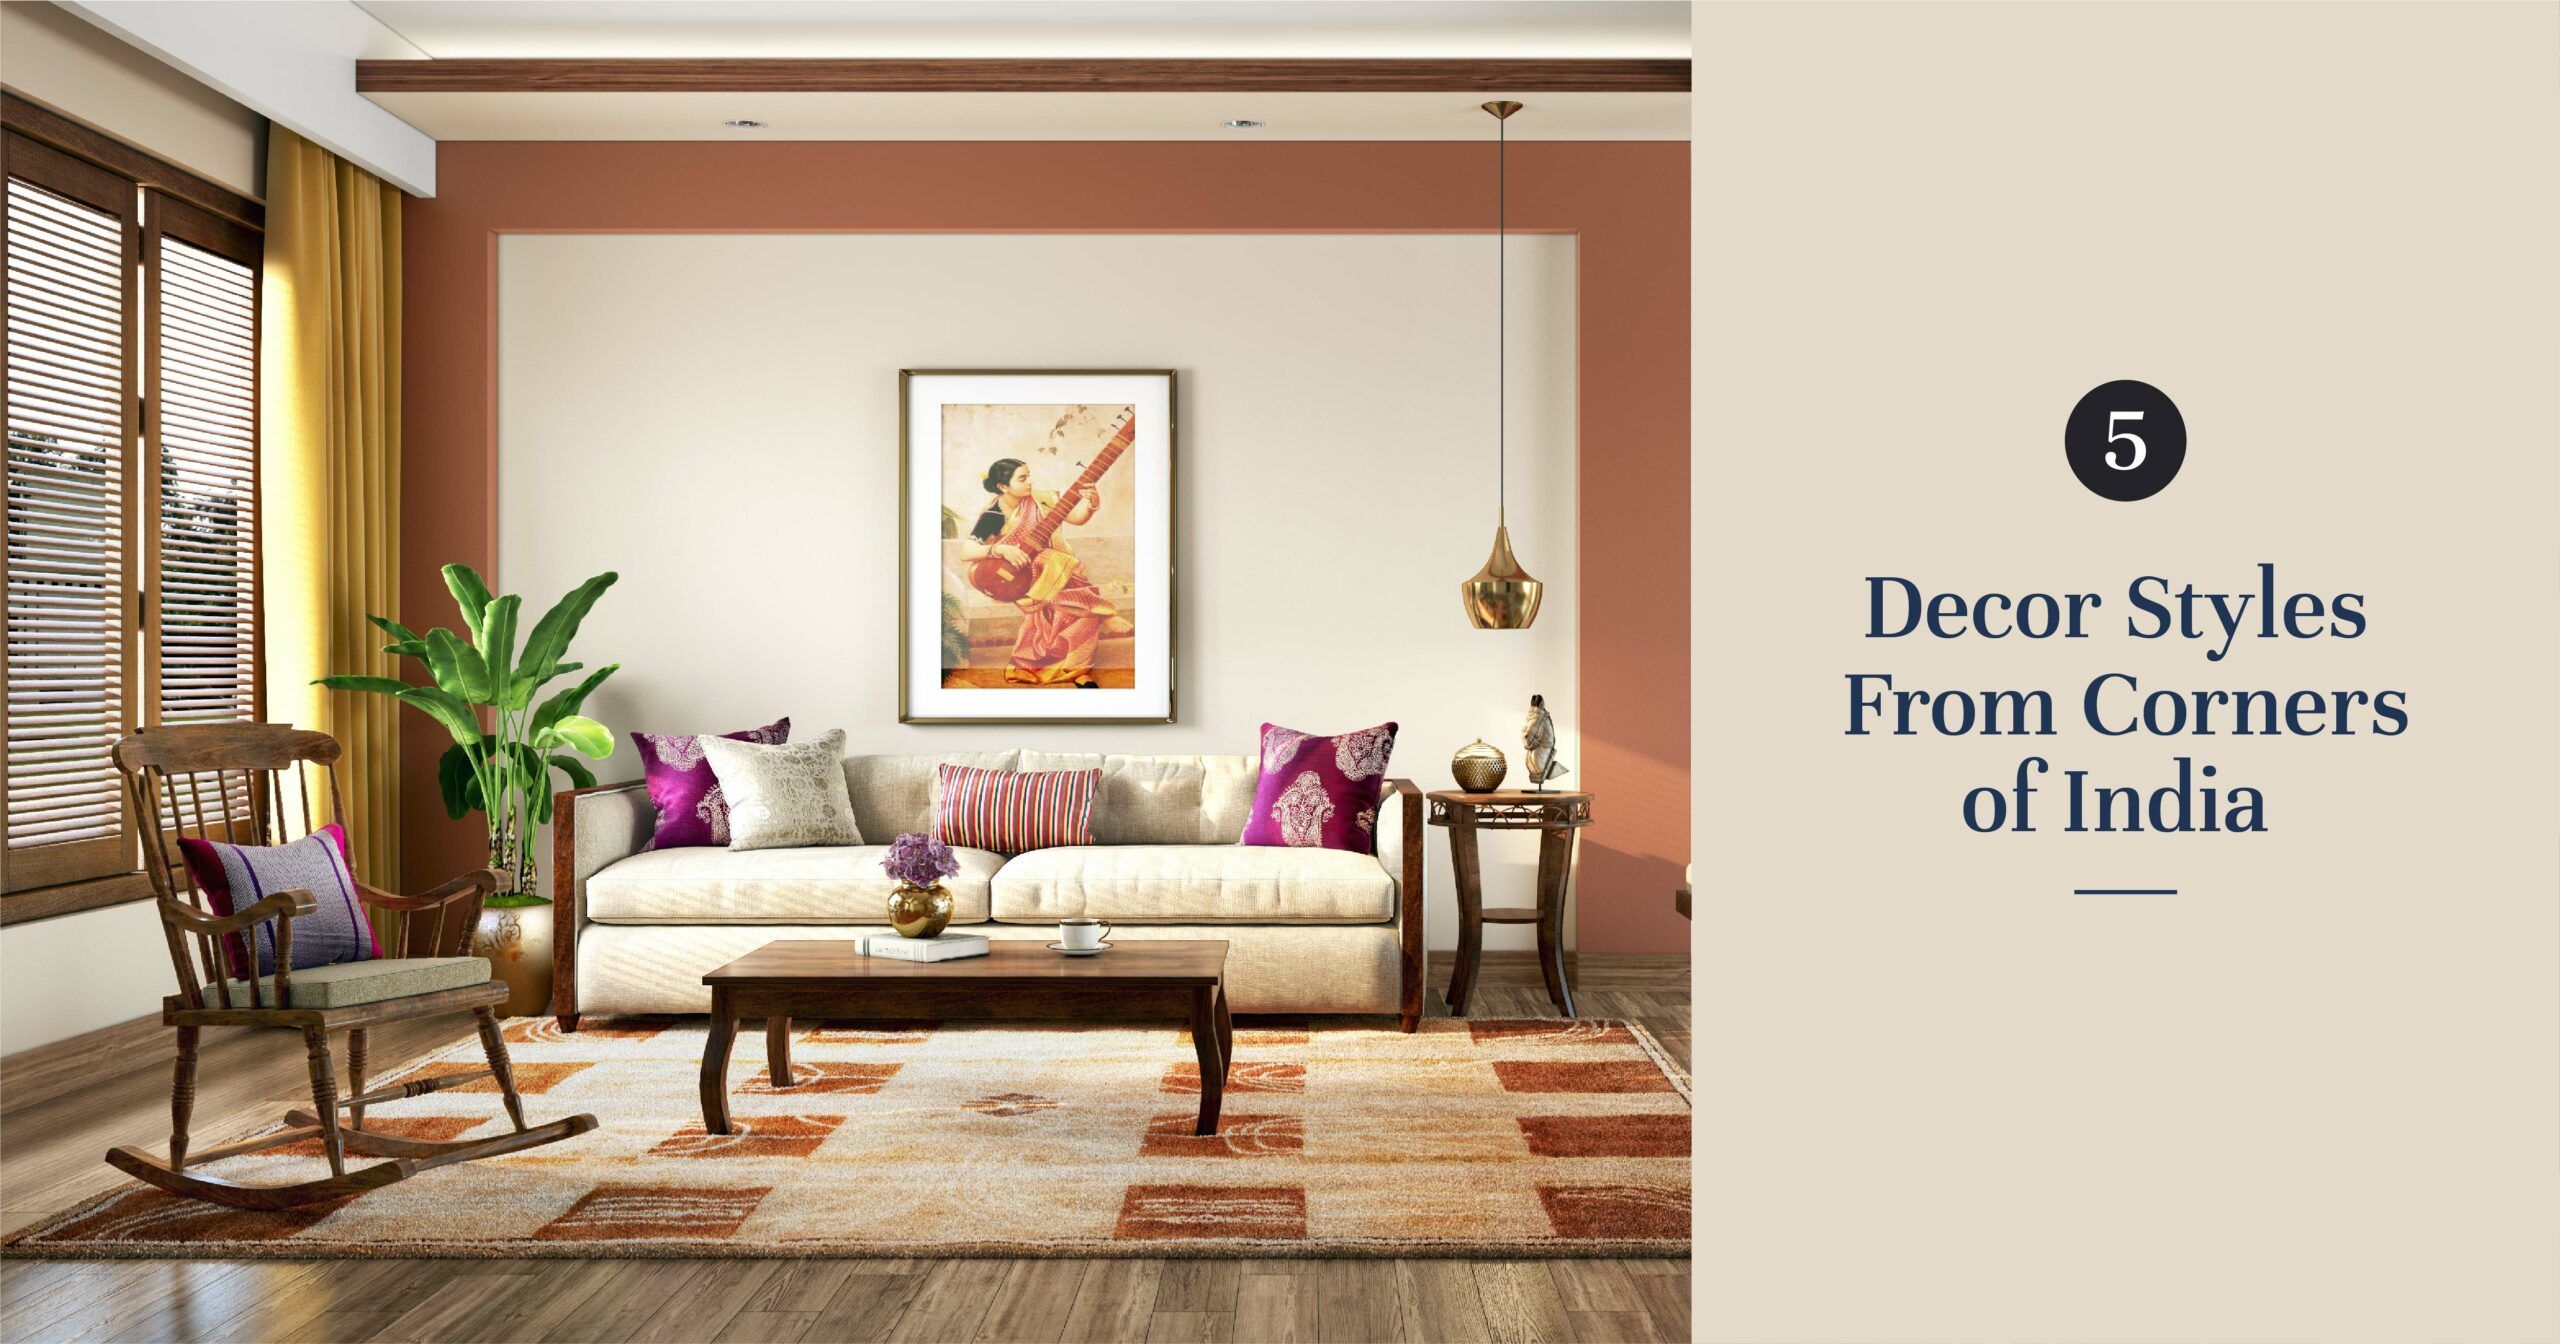 We Recreated Decor Styles From 5 Indian States - How To Decorate Living Room India